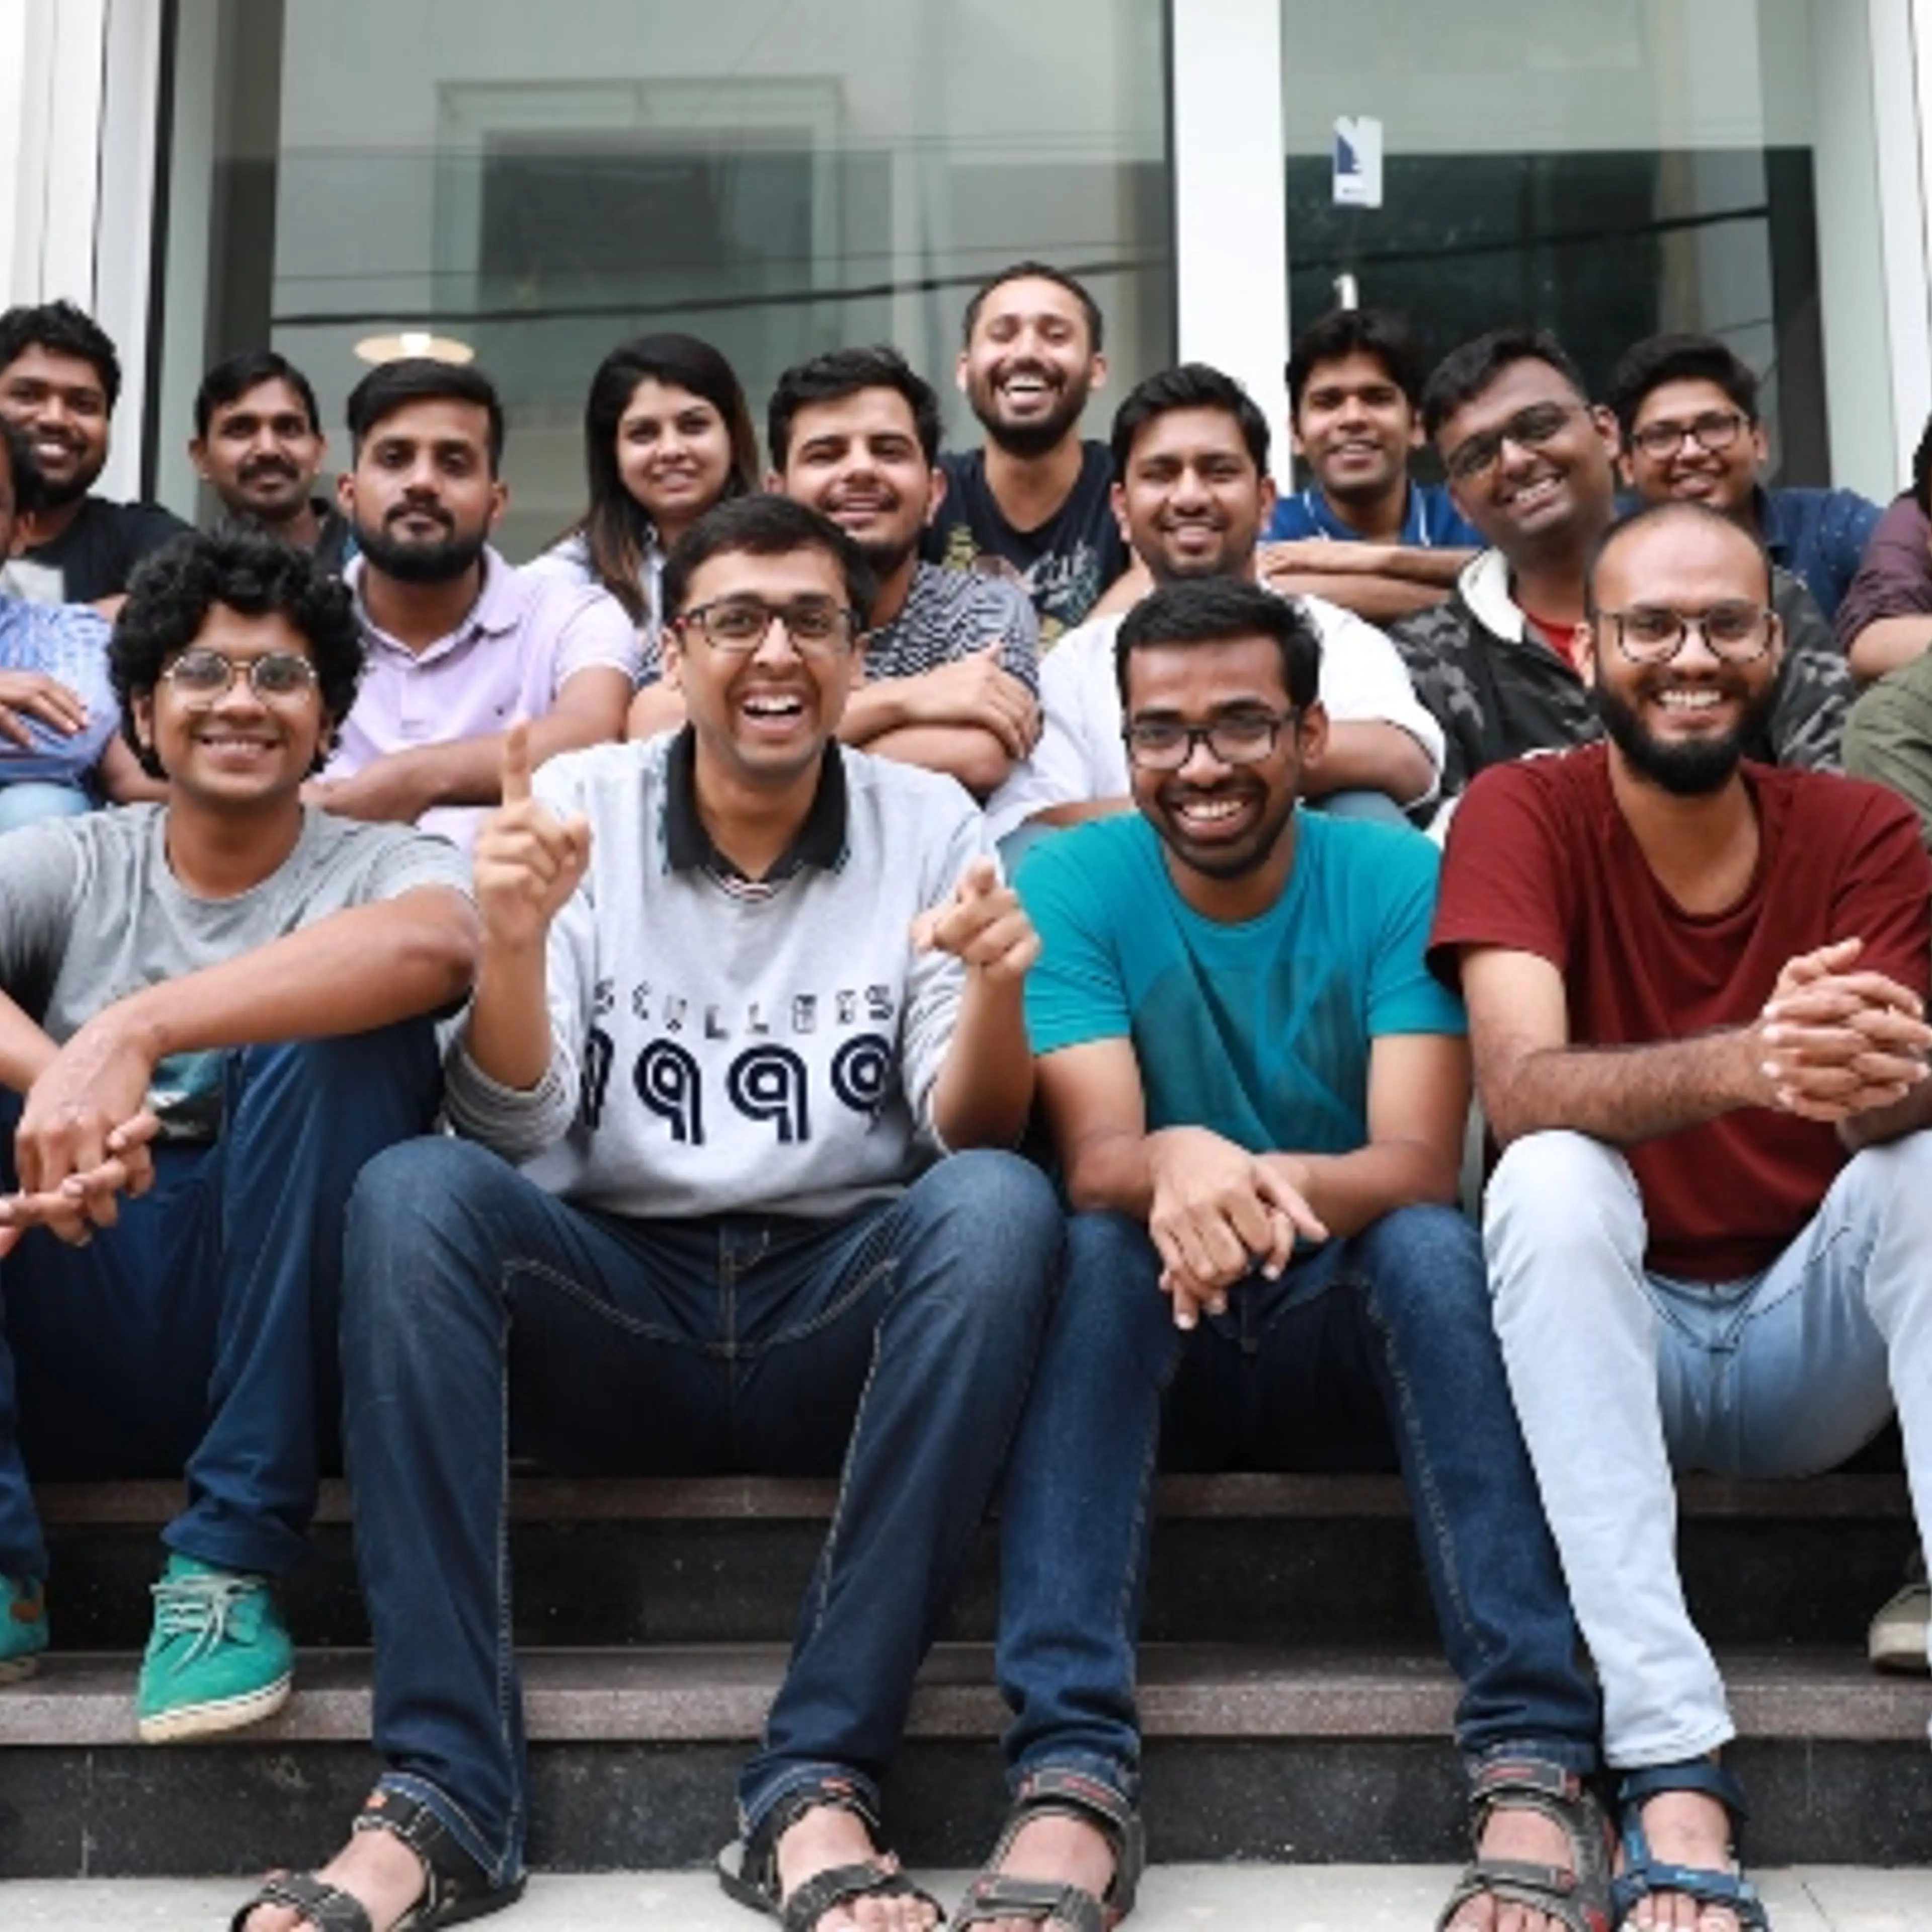 [Funding alert] KhataBook raises $25M in Series A led by GGV Capital, Partners of DST Global, Sequoia India, Tencent, others
